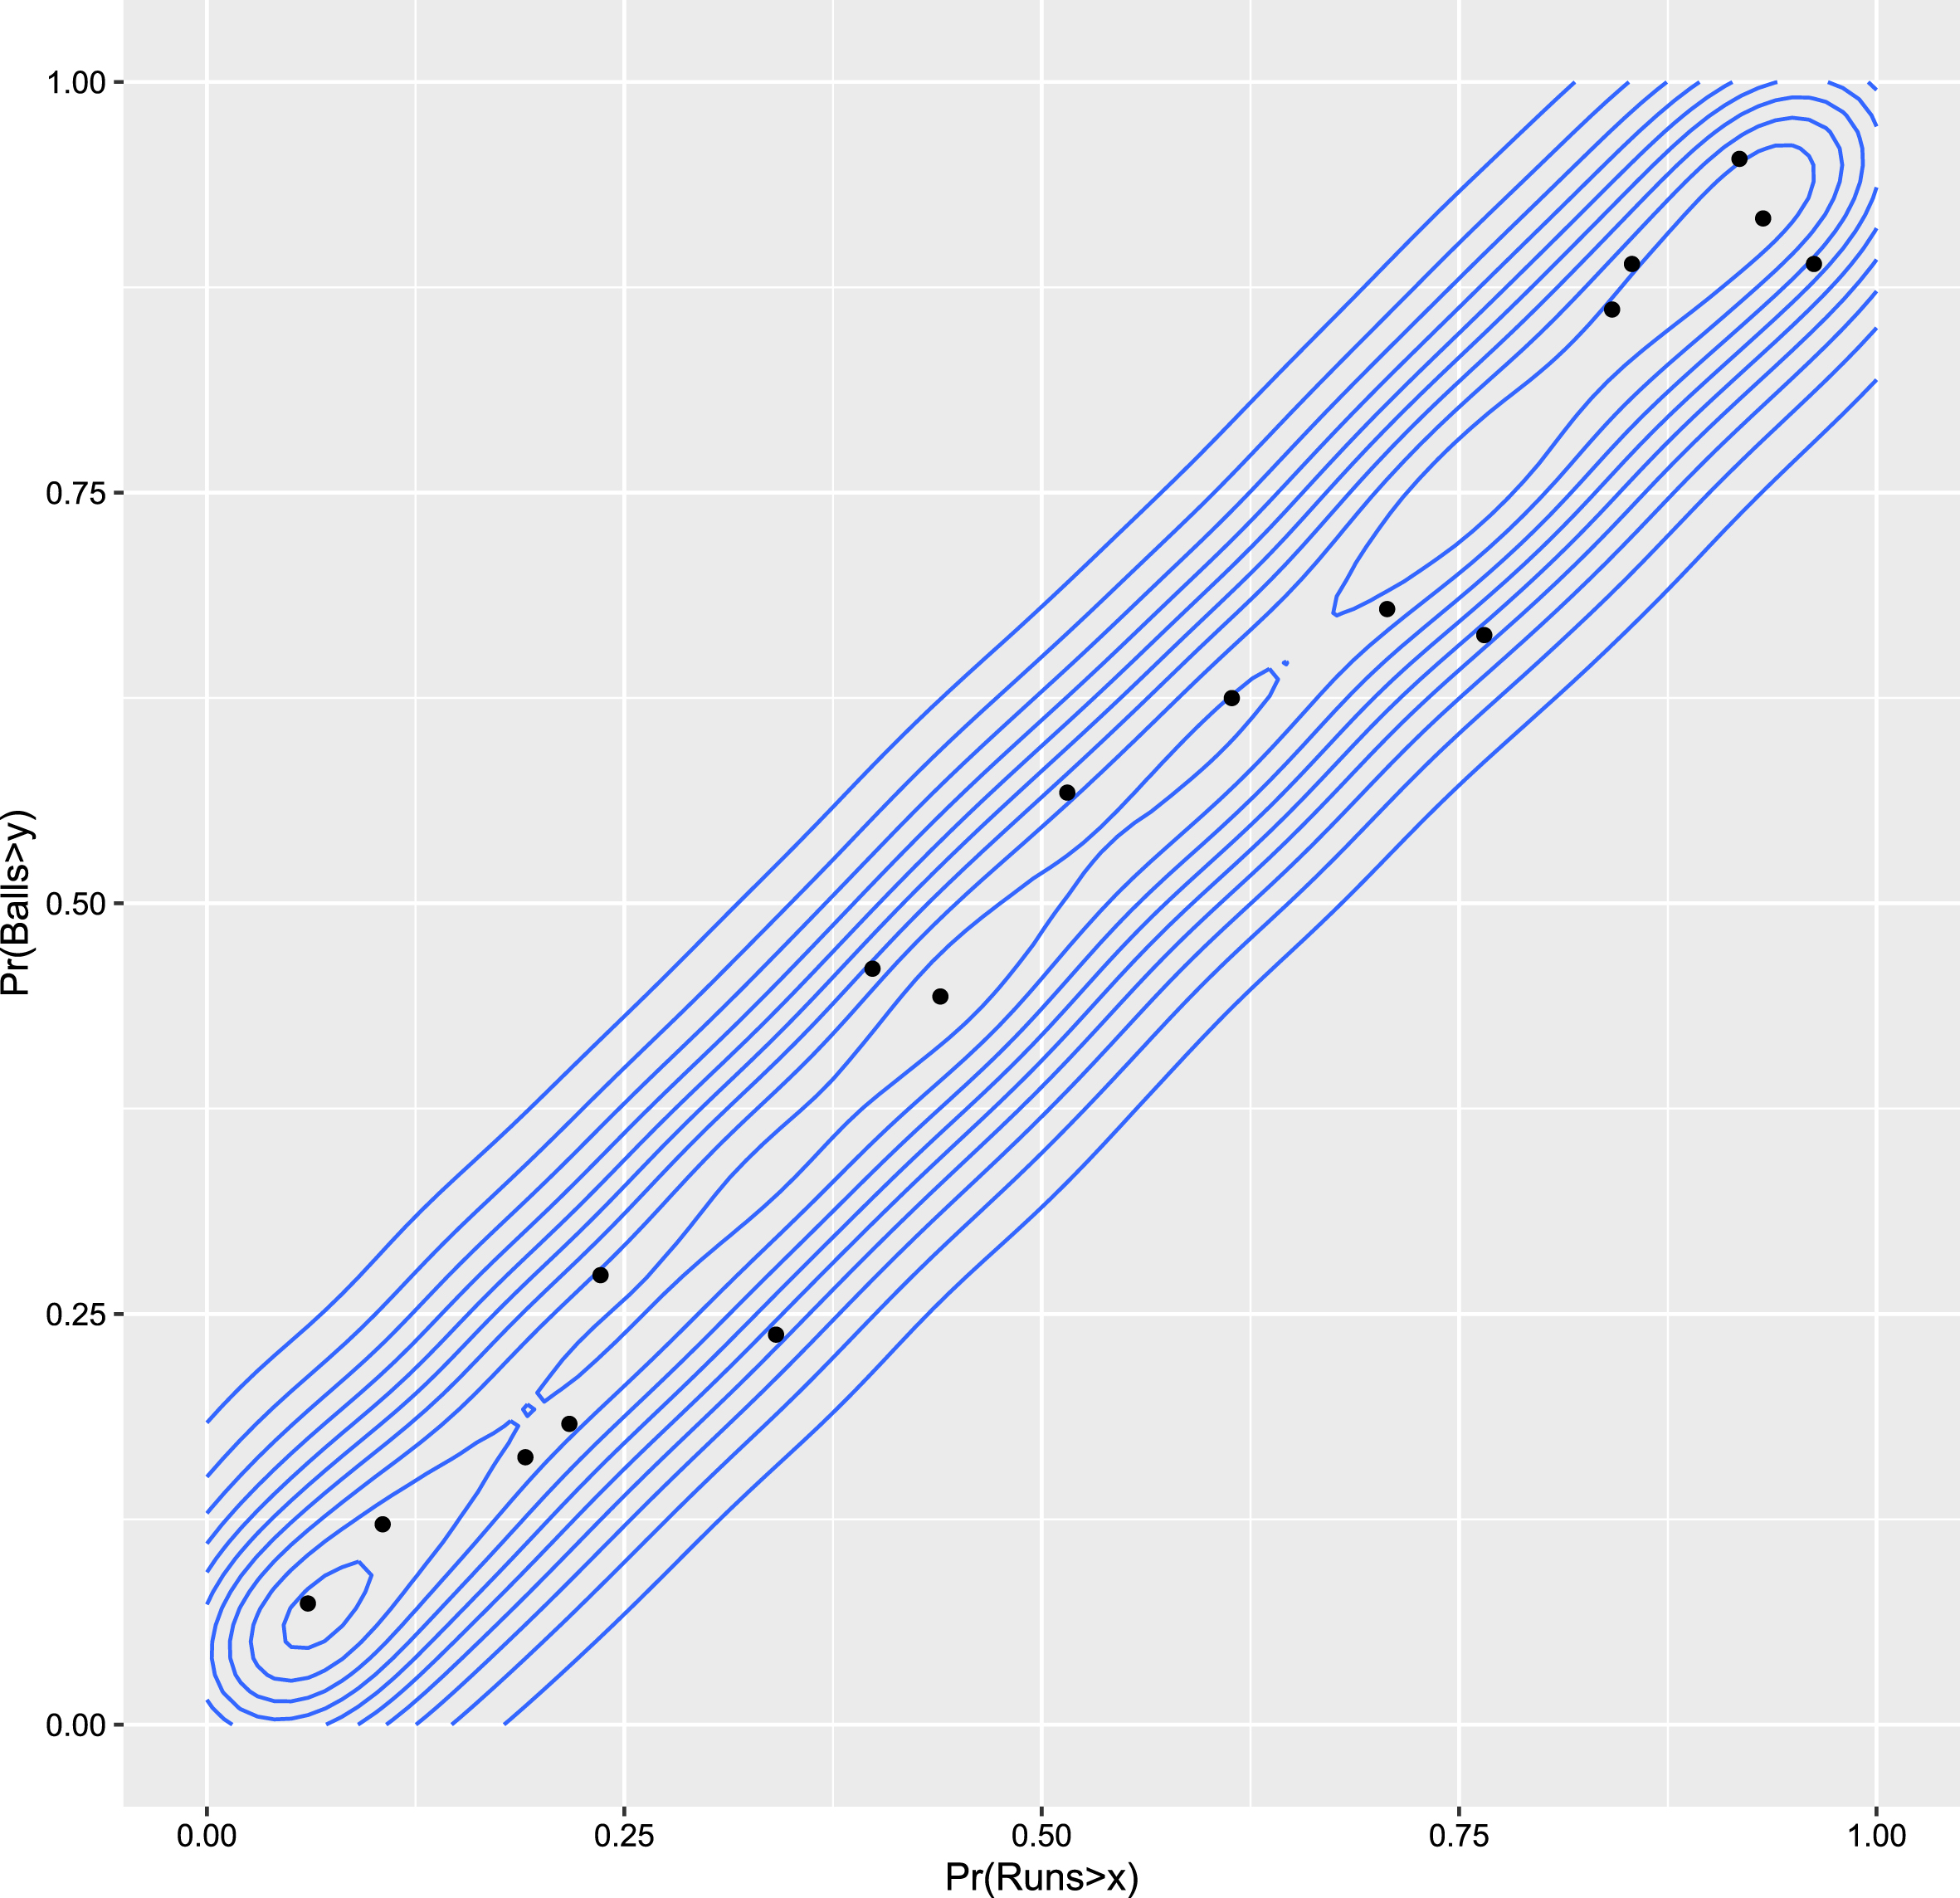 Contour plot for the joint survival probability distribution obtained using gamma marginals and Frank copula for the partnership
between Dhawan D and Rahane A M.